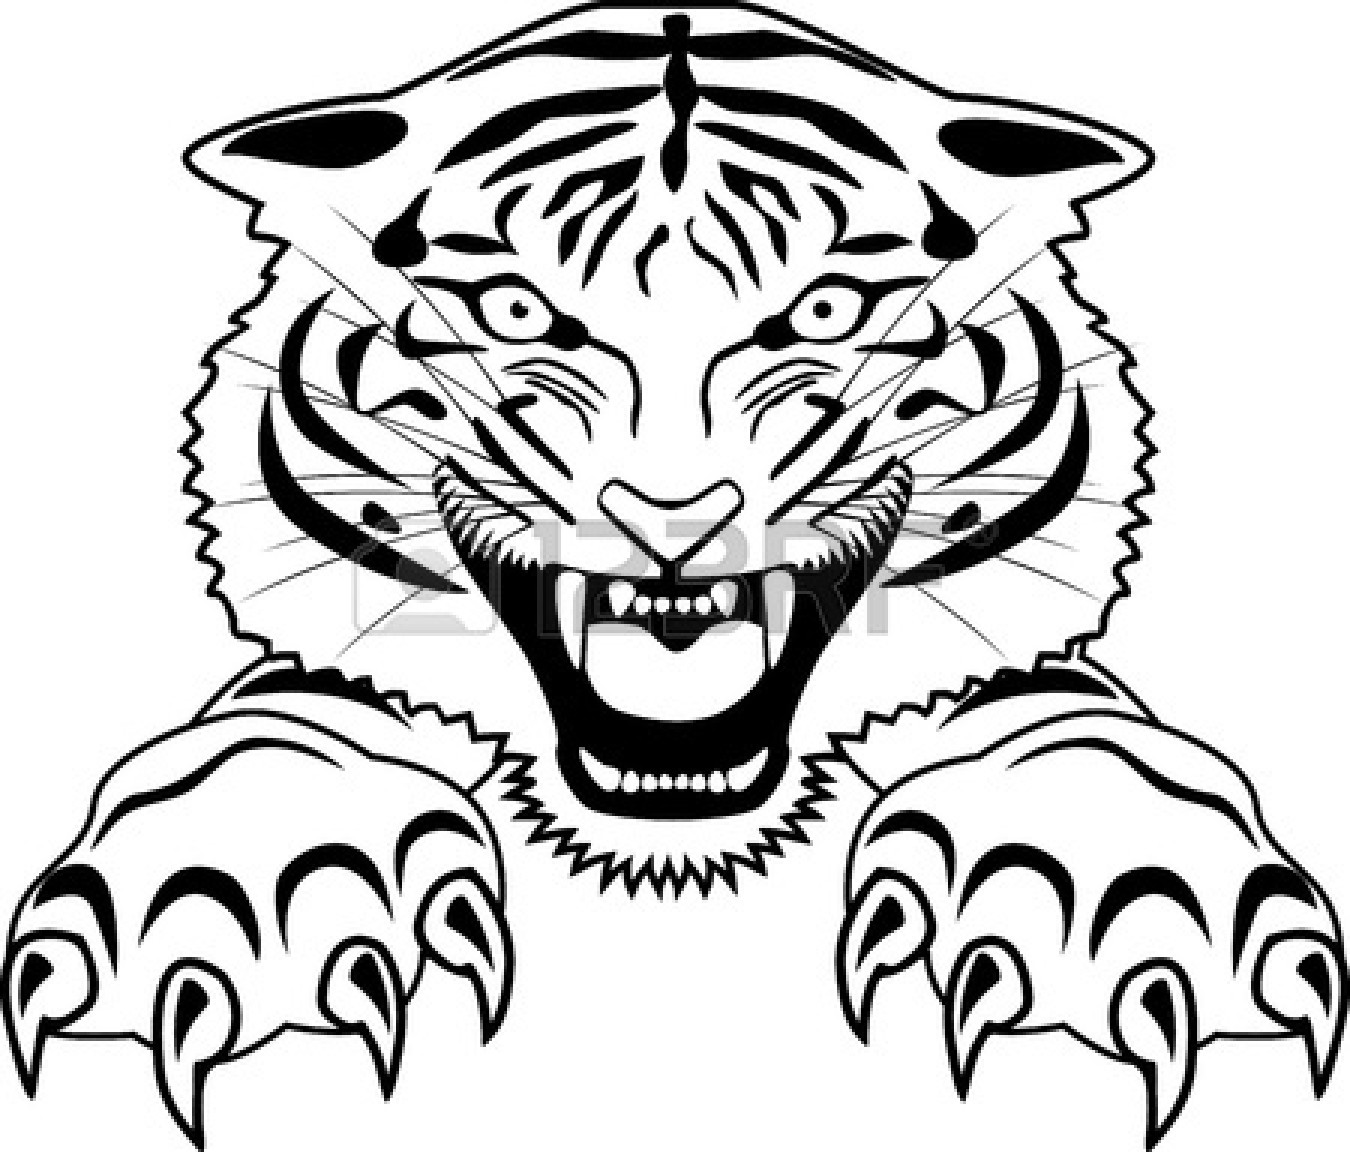 Arm Tattoo Png Clipart  Hand Tattoo Png For Picsart  Full Size PNG  Clipart Images Download  Tiger tattoo design Tribal tiger tattoo Small  dragon tattoos